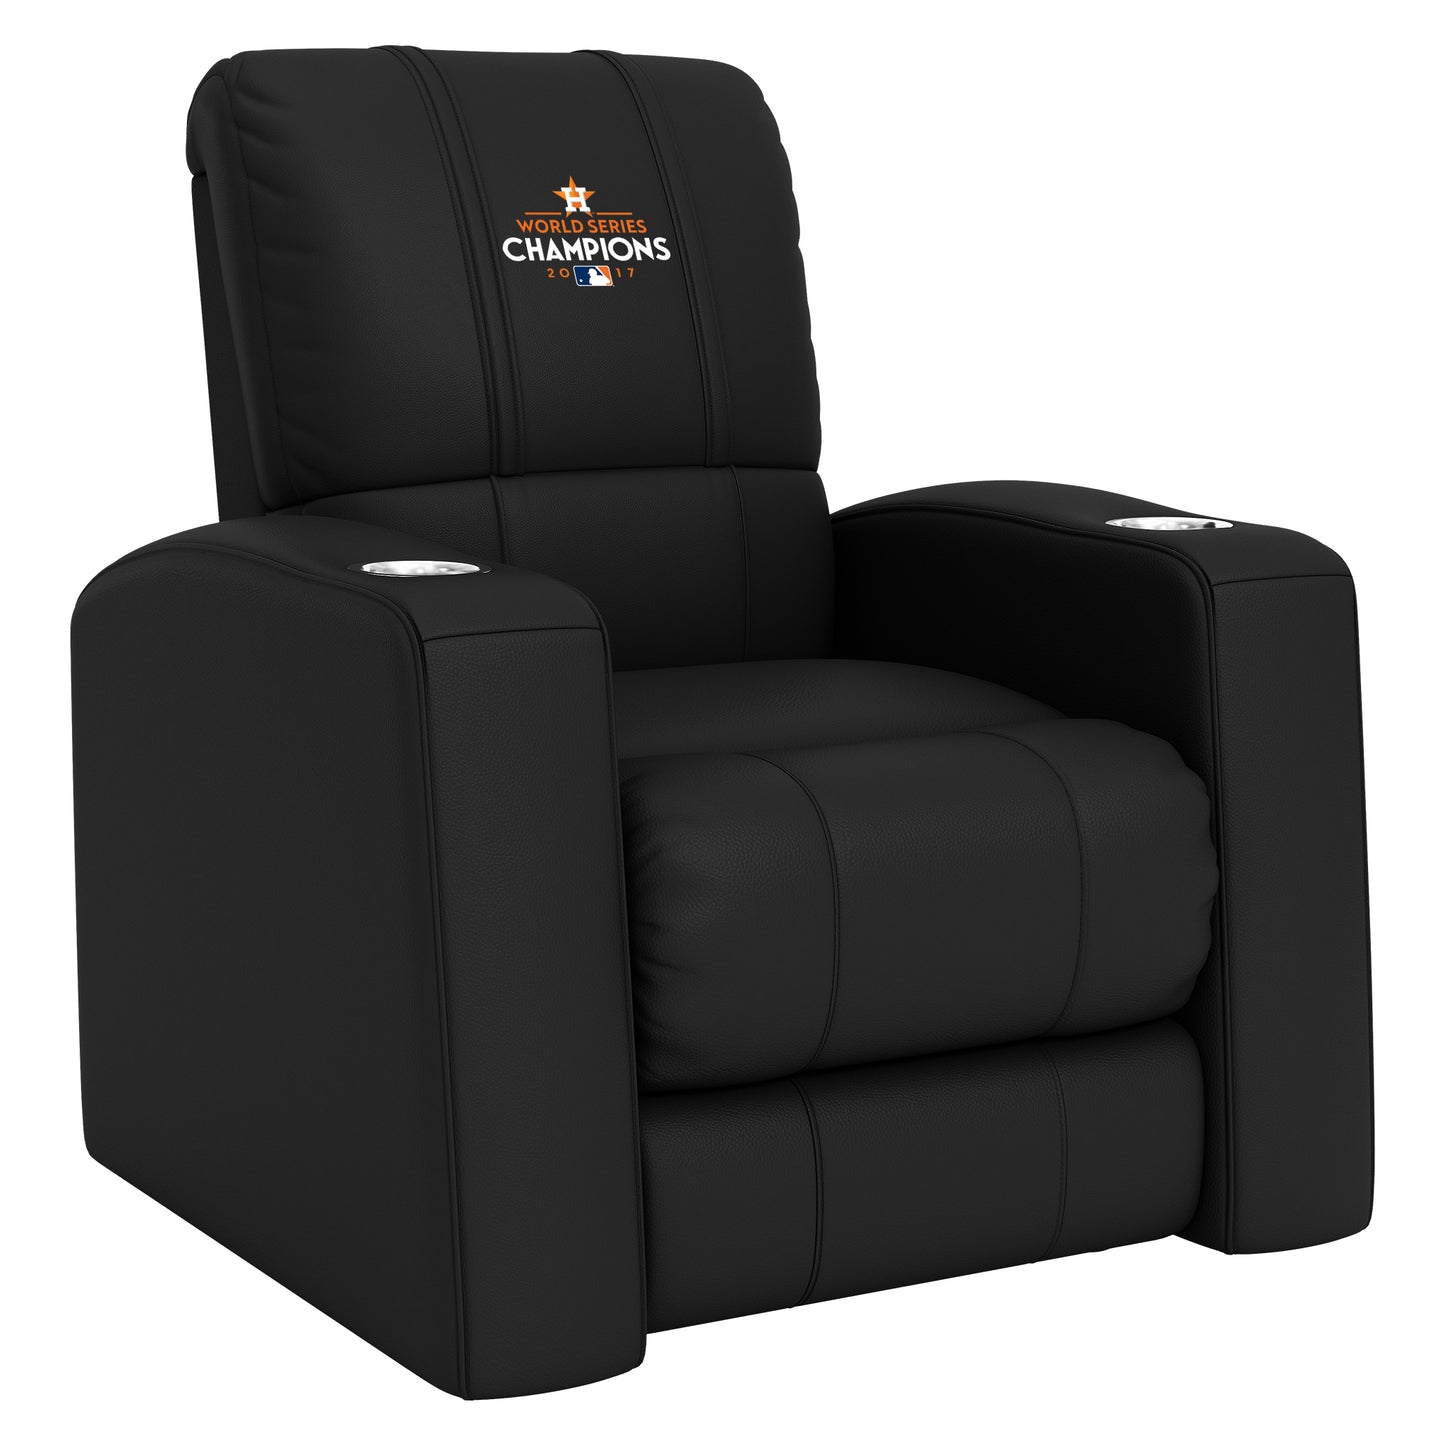 Relax Home Theater Recliner with Houston Astros 2017 Champions